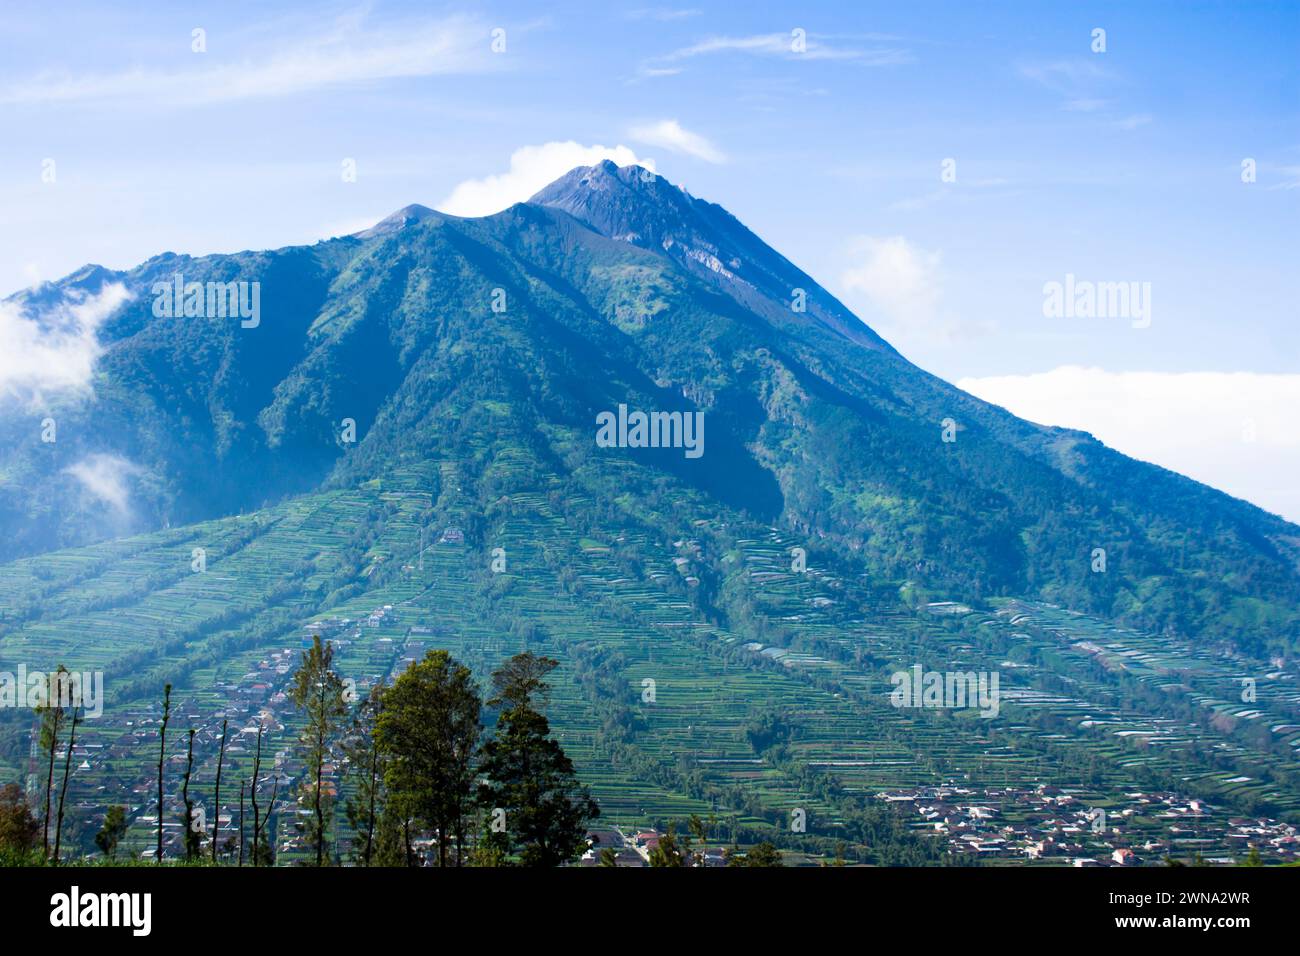 Photo of the view of Manajar Reservoir with a view of Mount Merbabu in Boyolali, Central Java Stock Photo